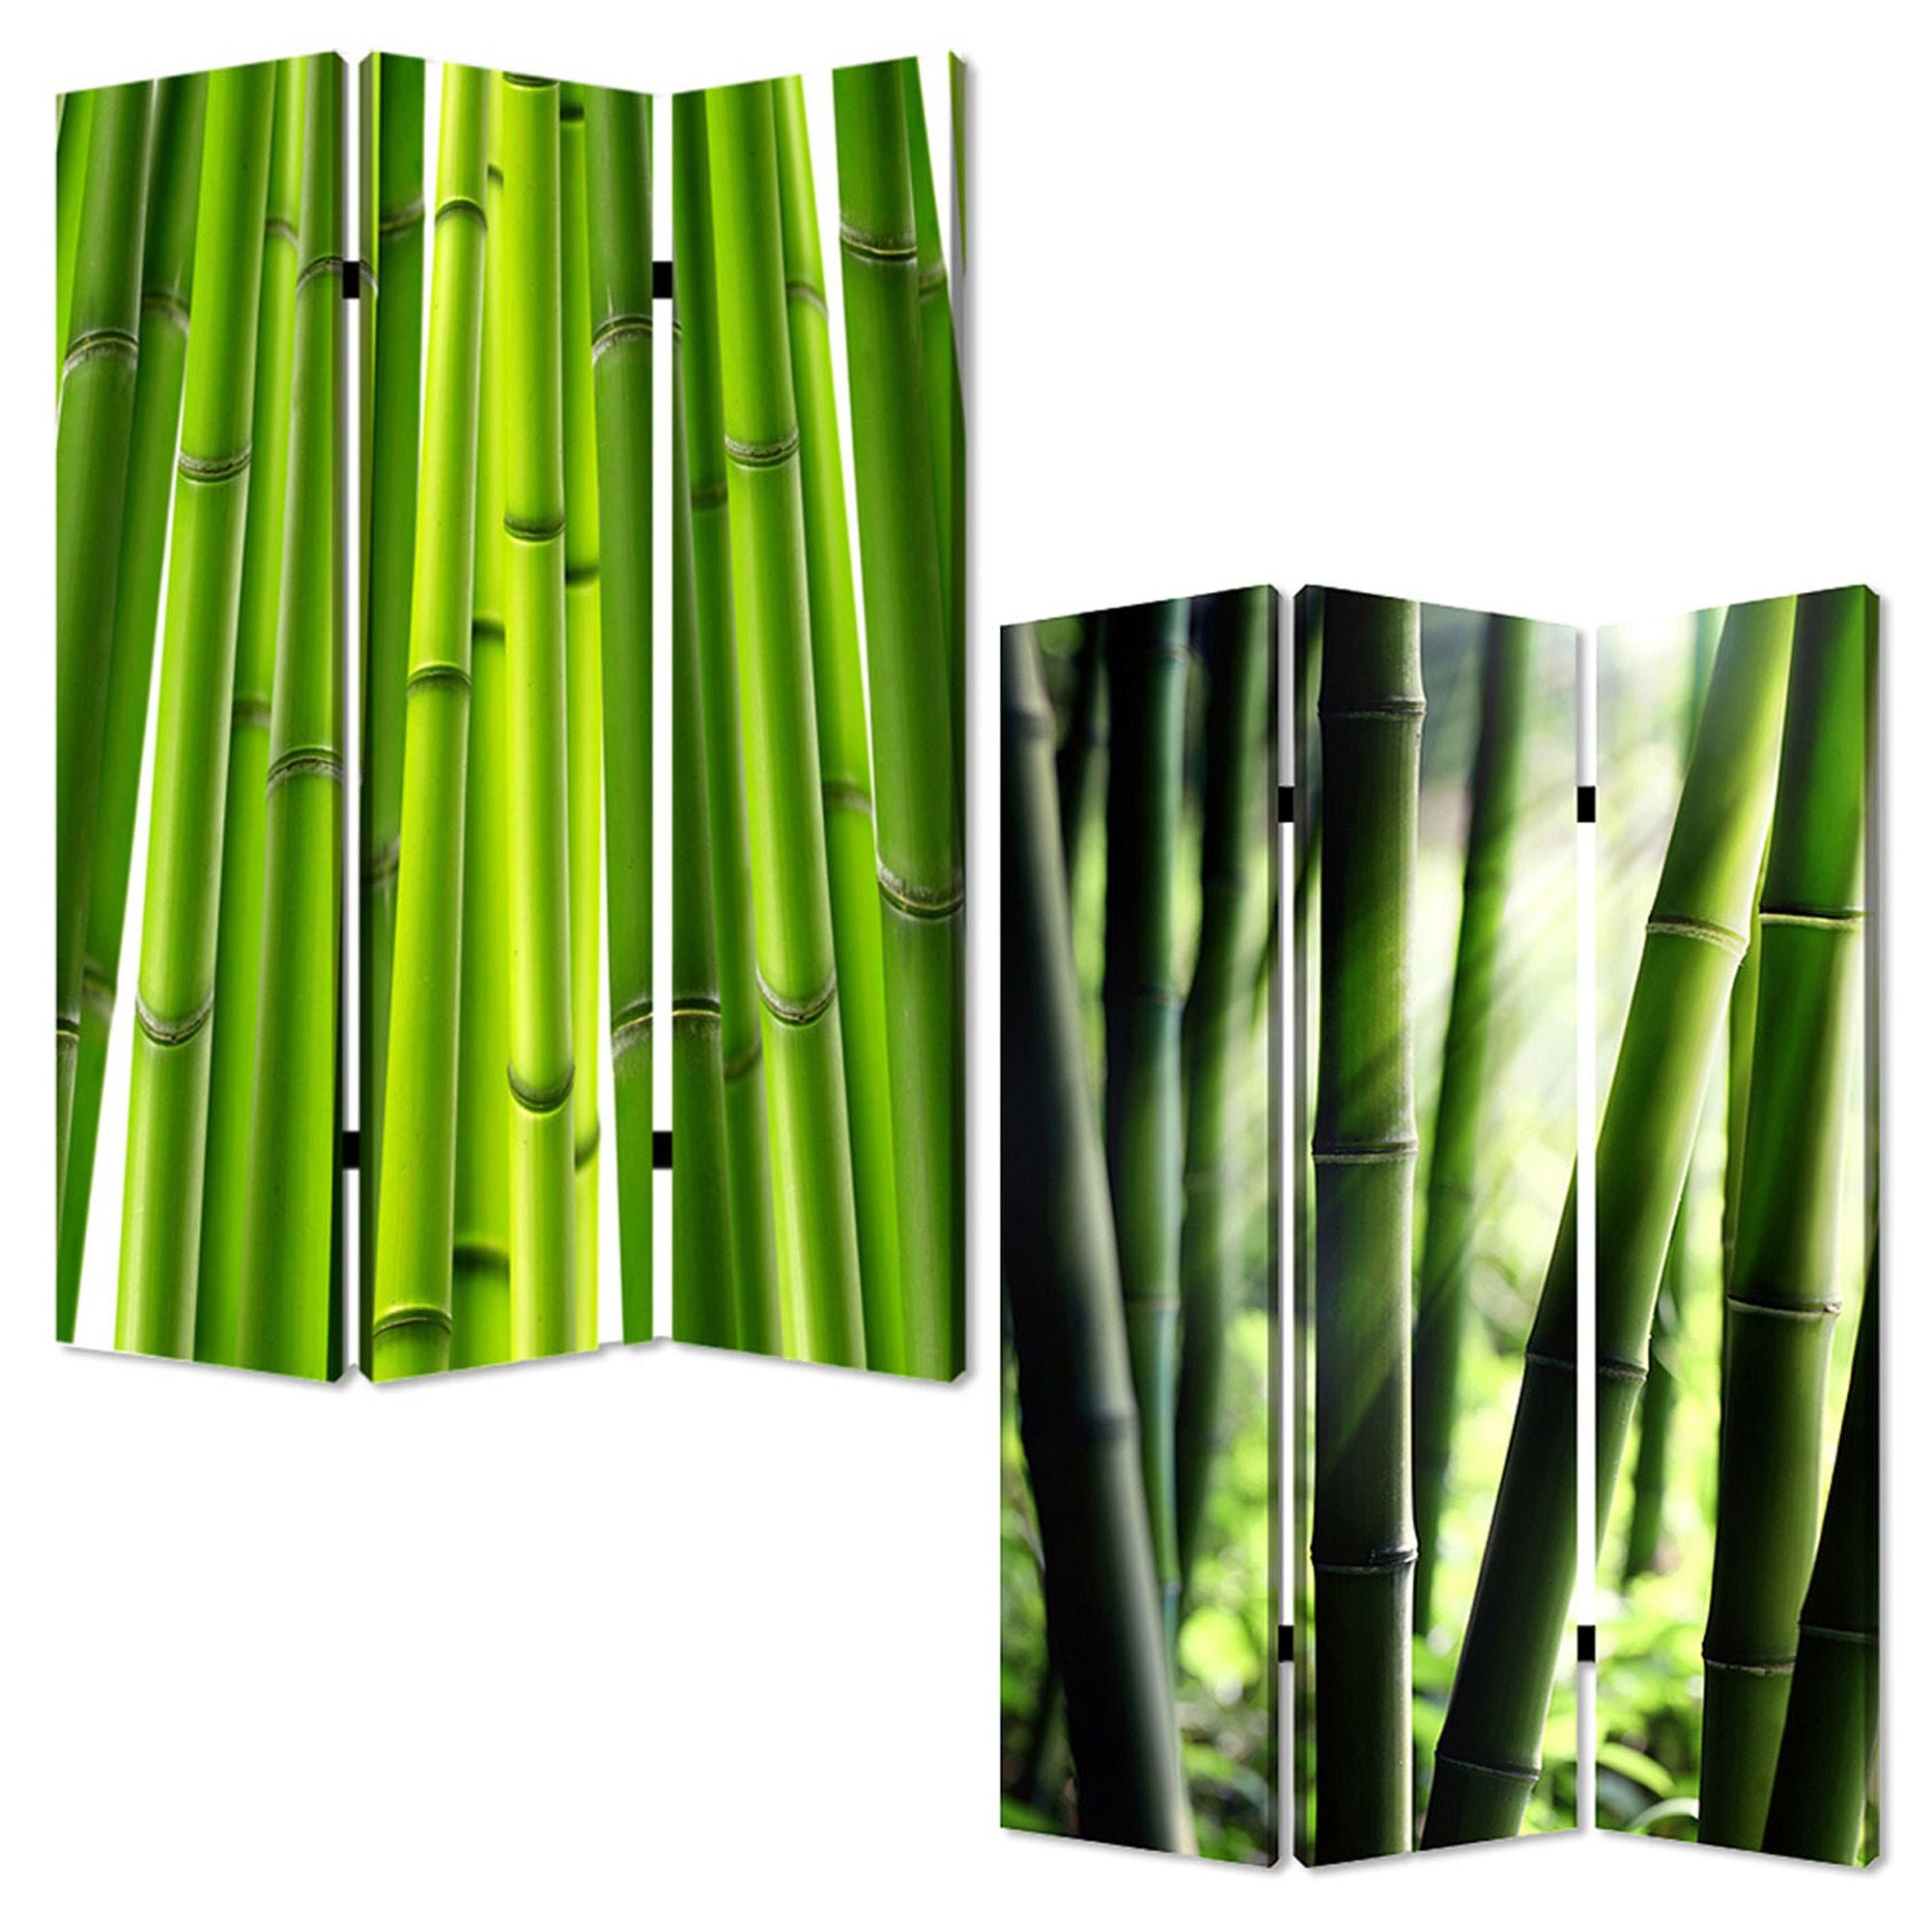 48" X 72" Multi Color Wood Canvas Bamboo  Screen